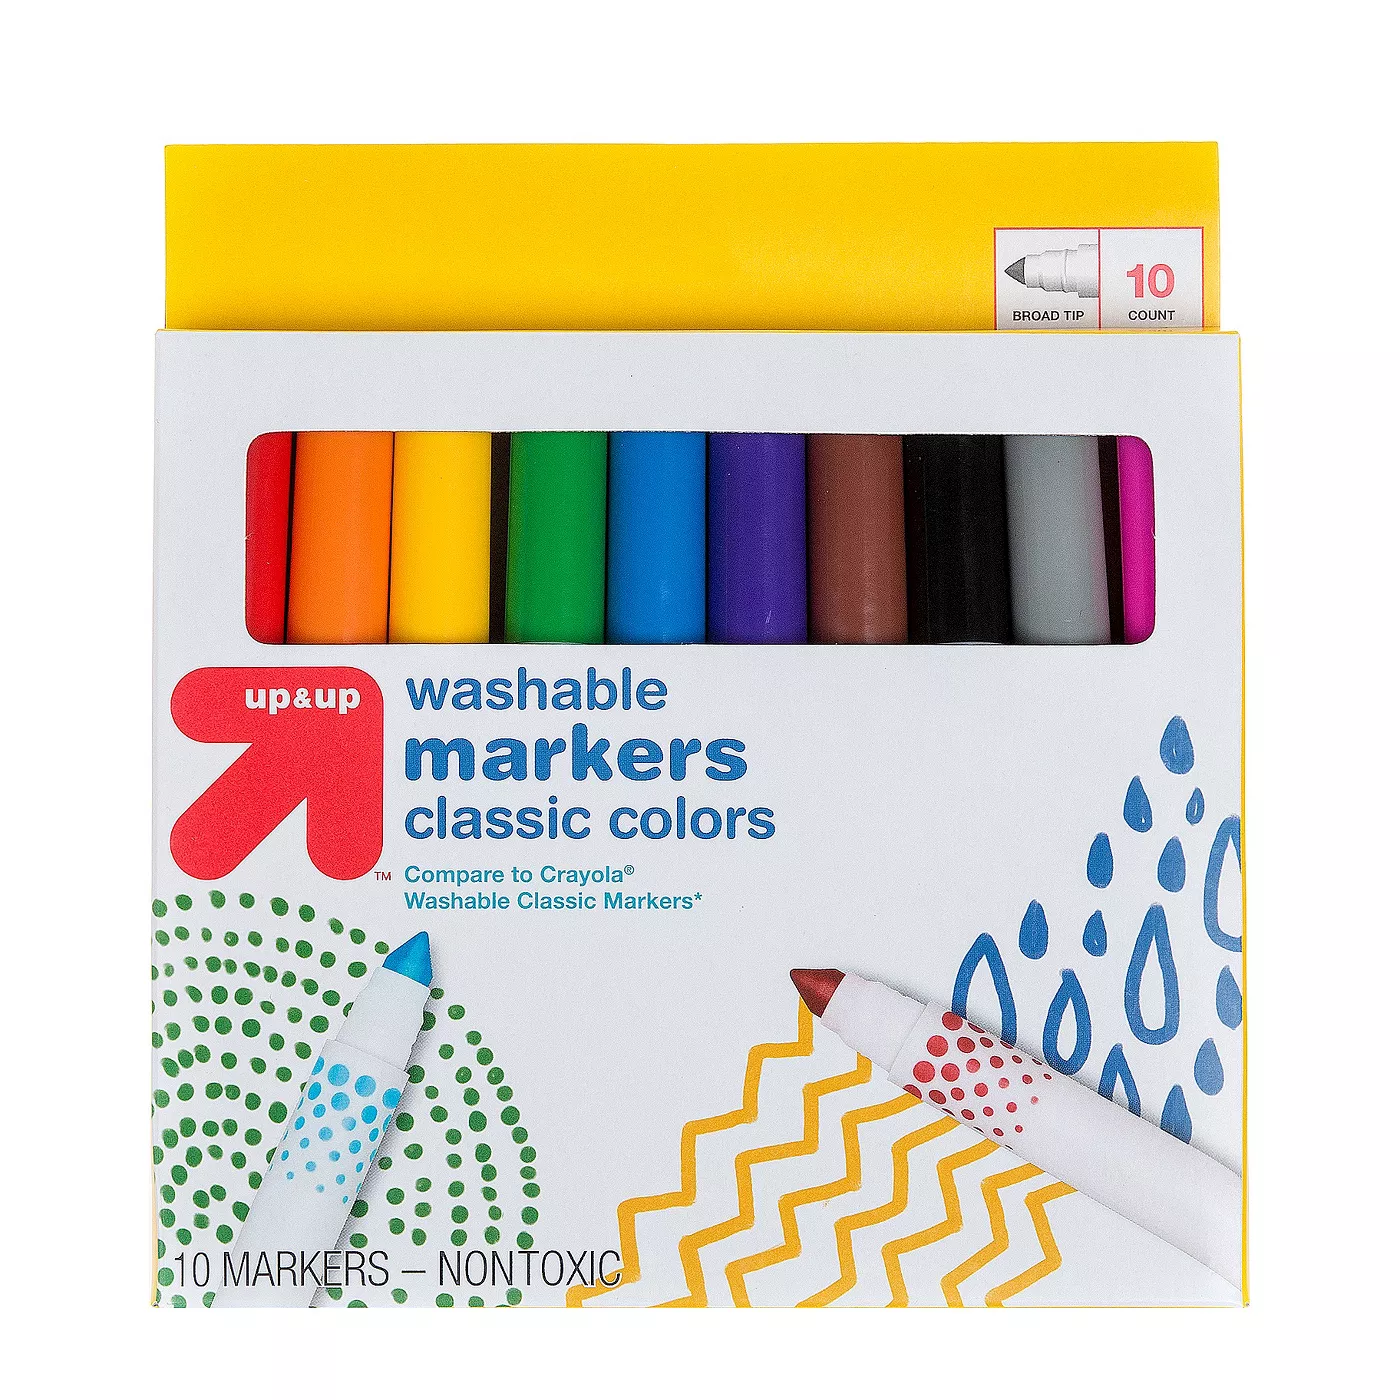 Markers Broad Tip Washable Classic Colors 10ct - Up&Up™ - image 1 of 3